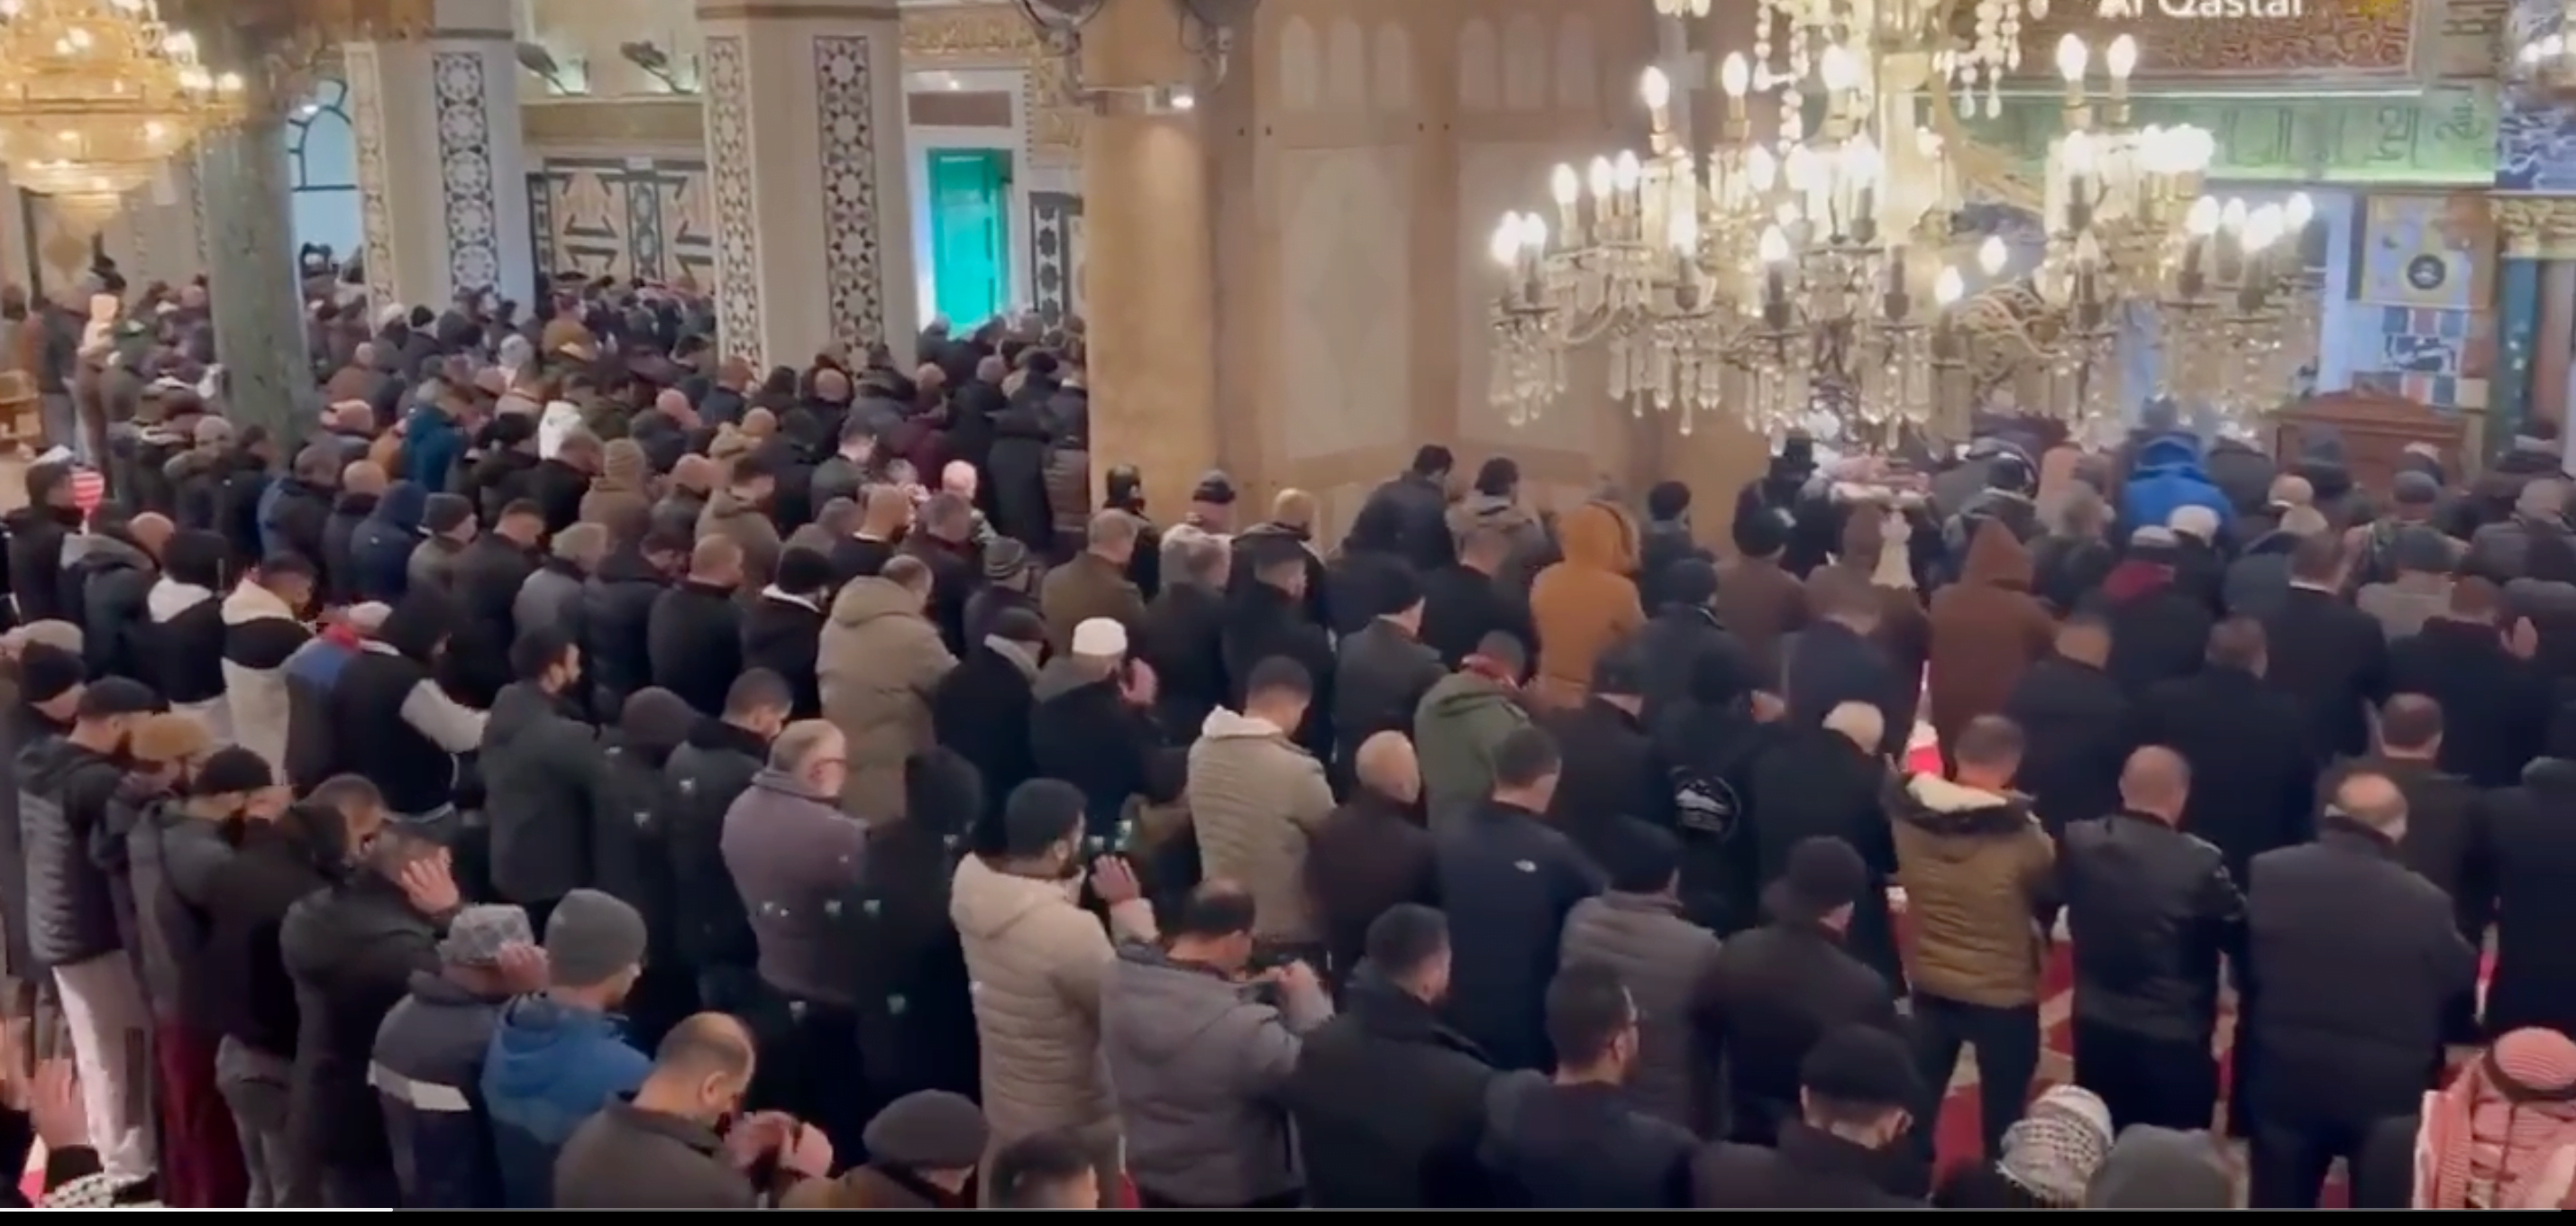 Funeral prayers at Al Aqsa Mosque for earthquake victims in Turkey and Syria